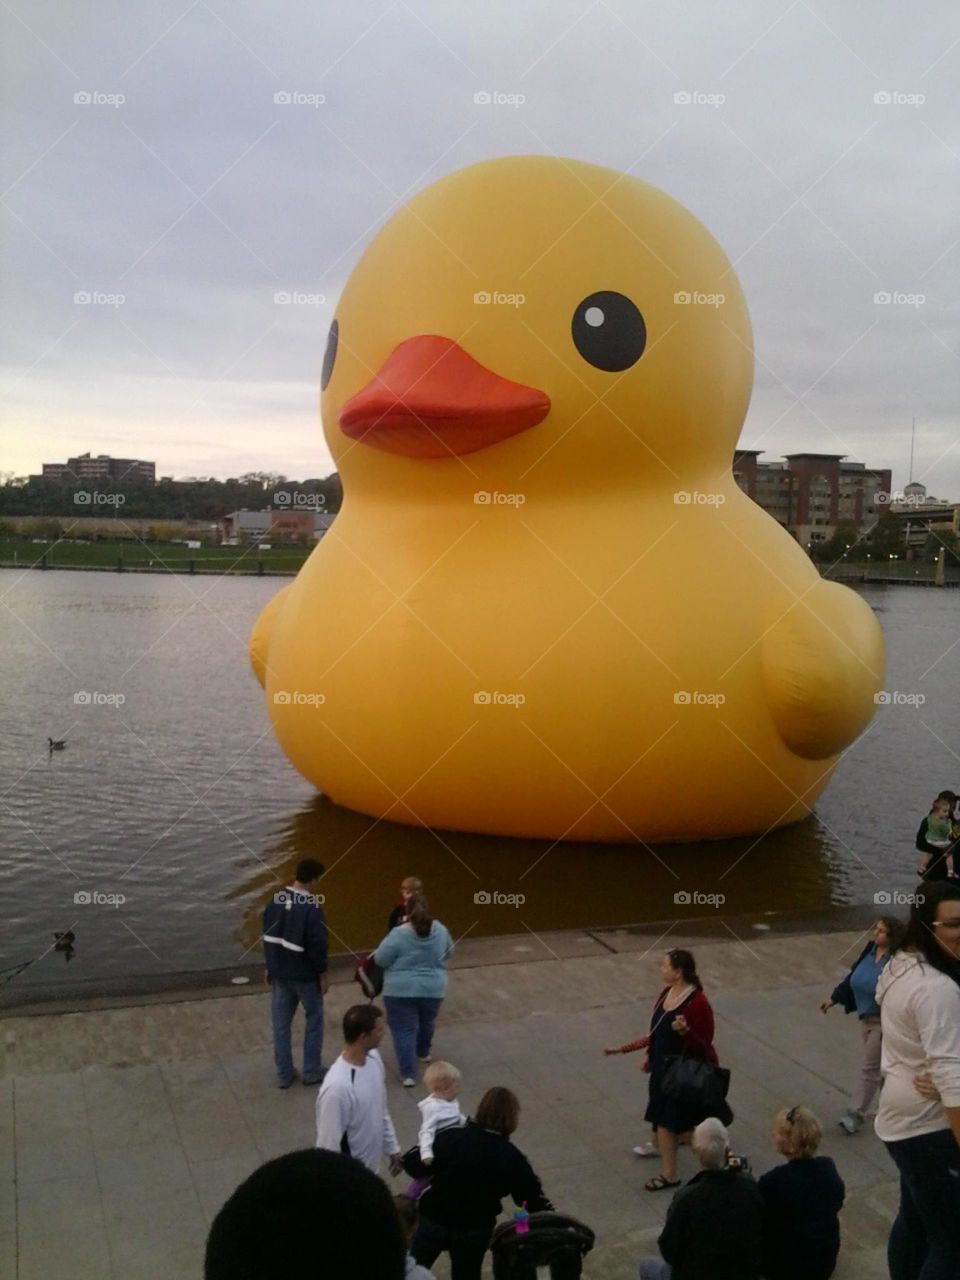 The Giant Rubber Duck on the River